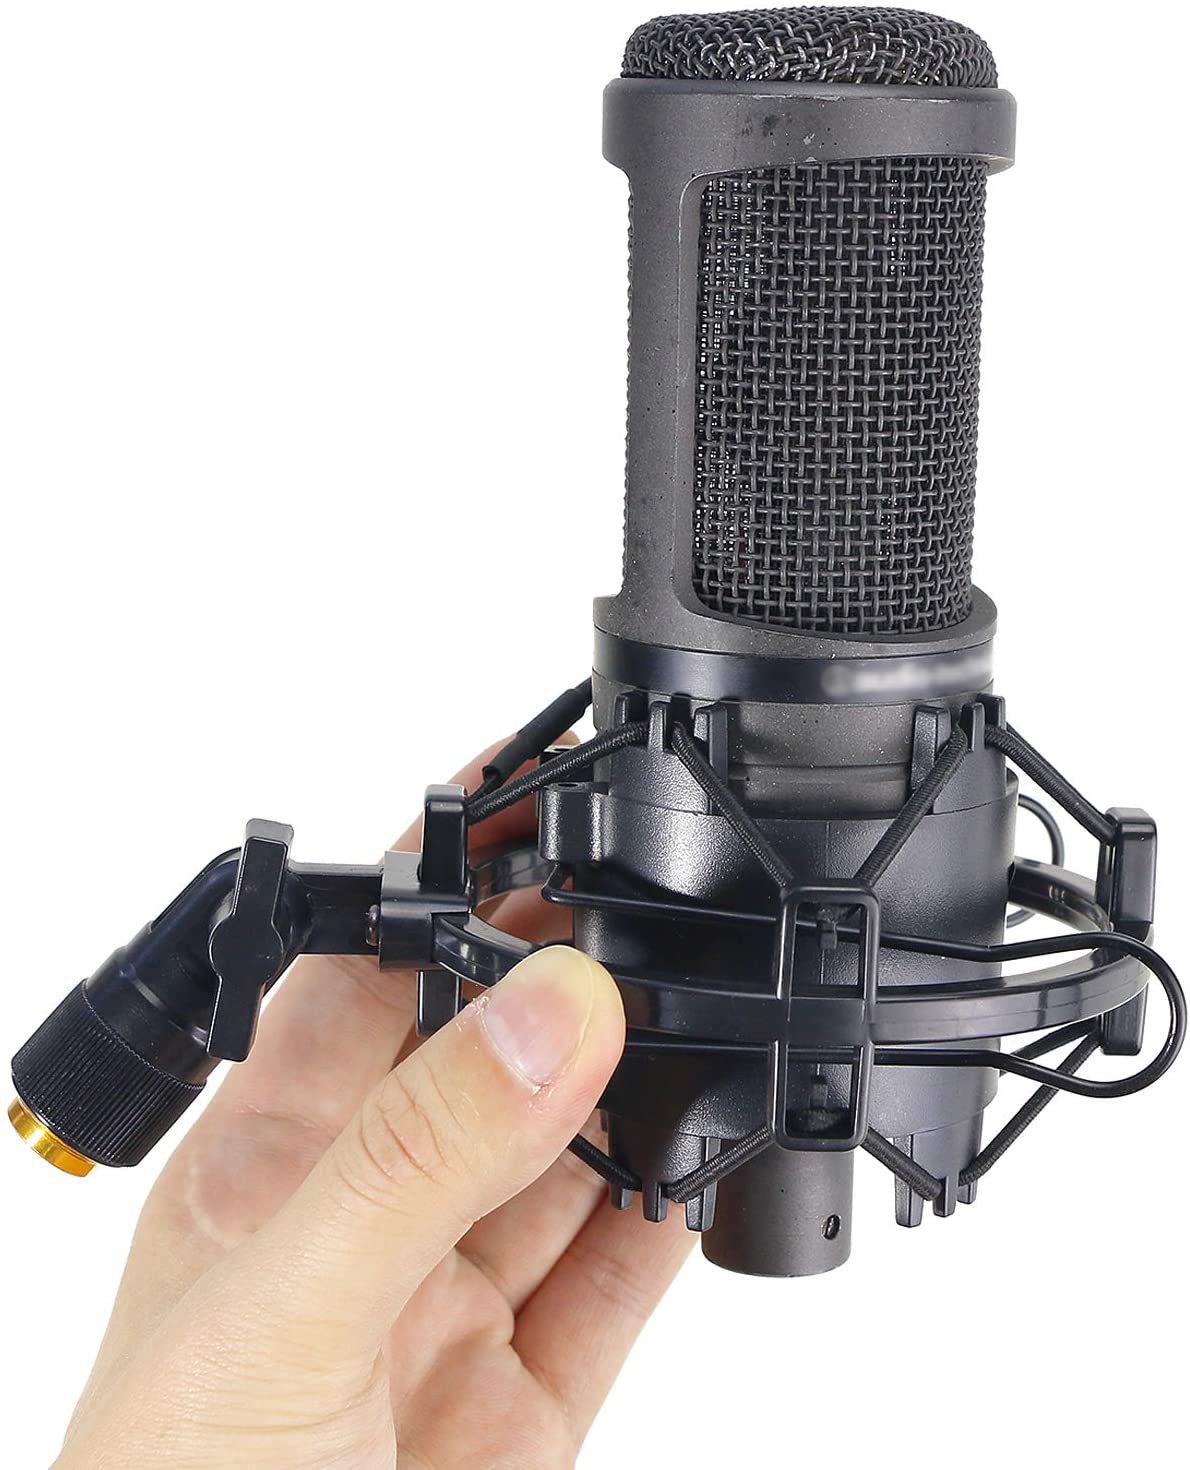 What Are The 3 Most Common Types of Microphone Construction?